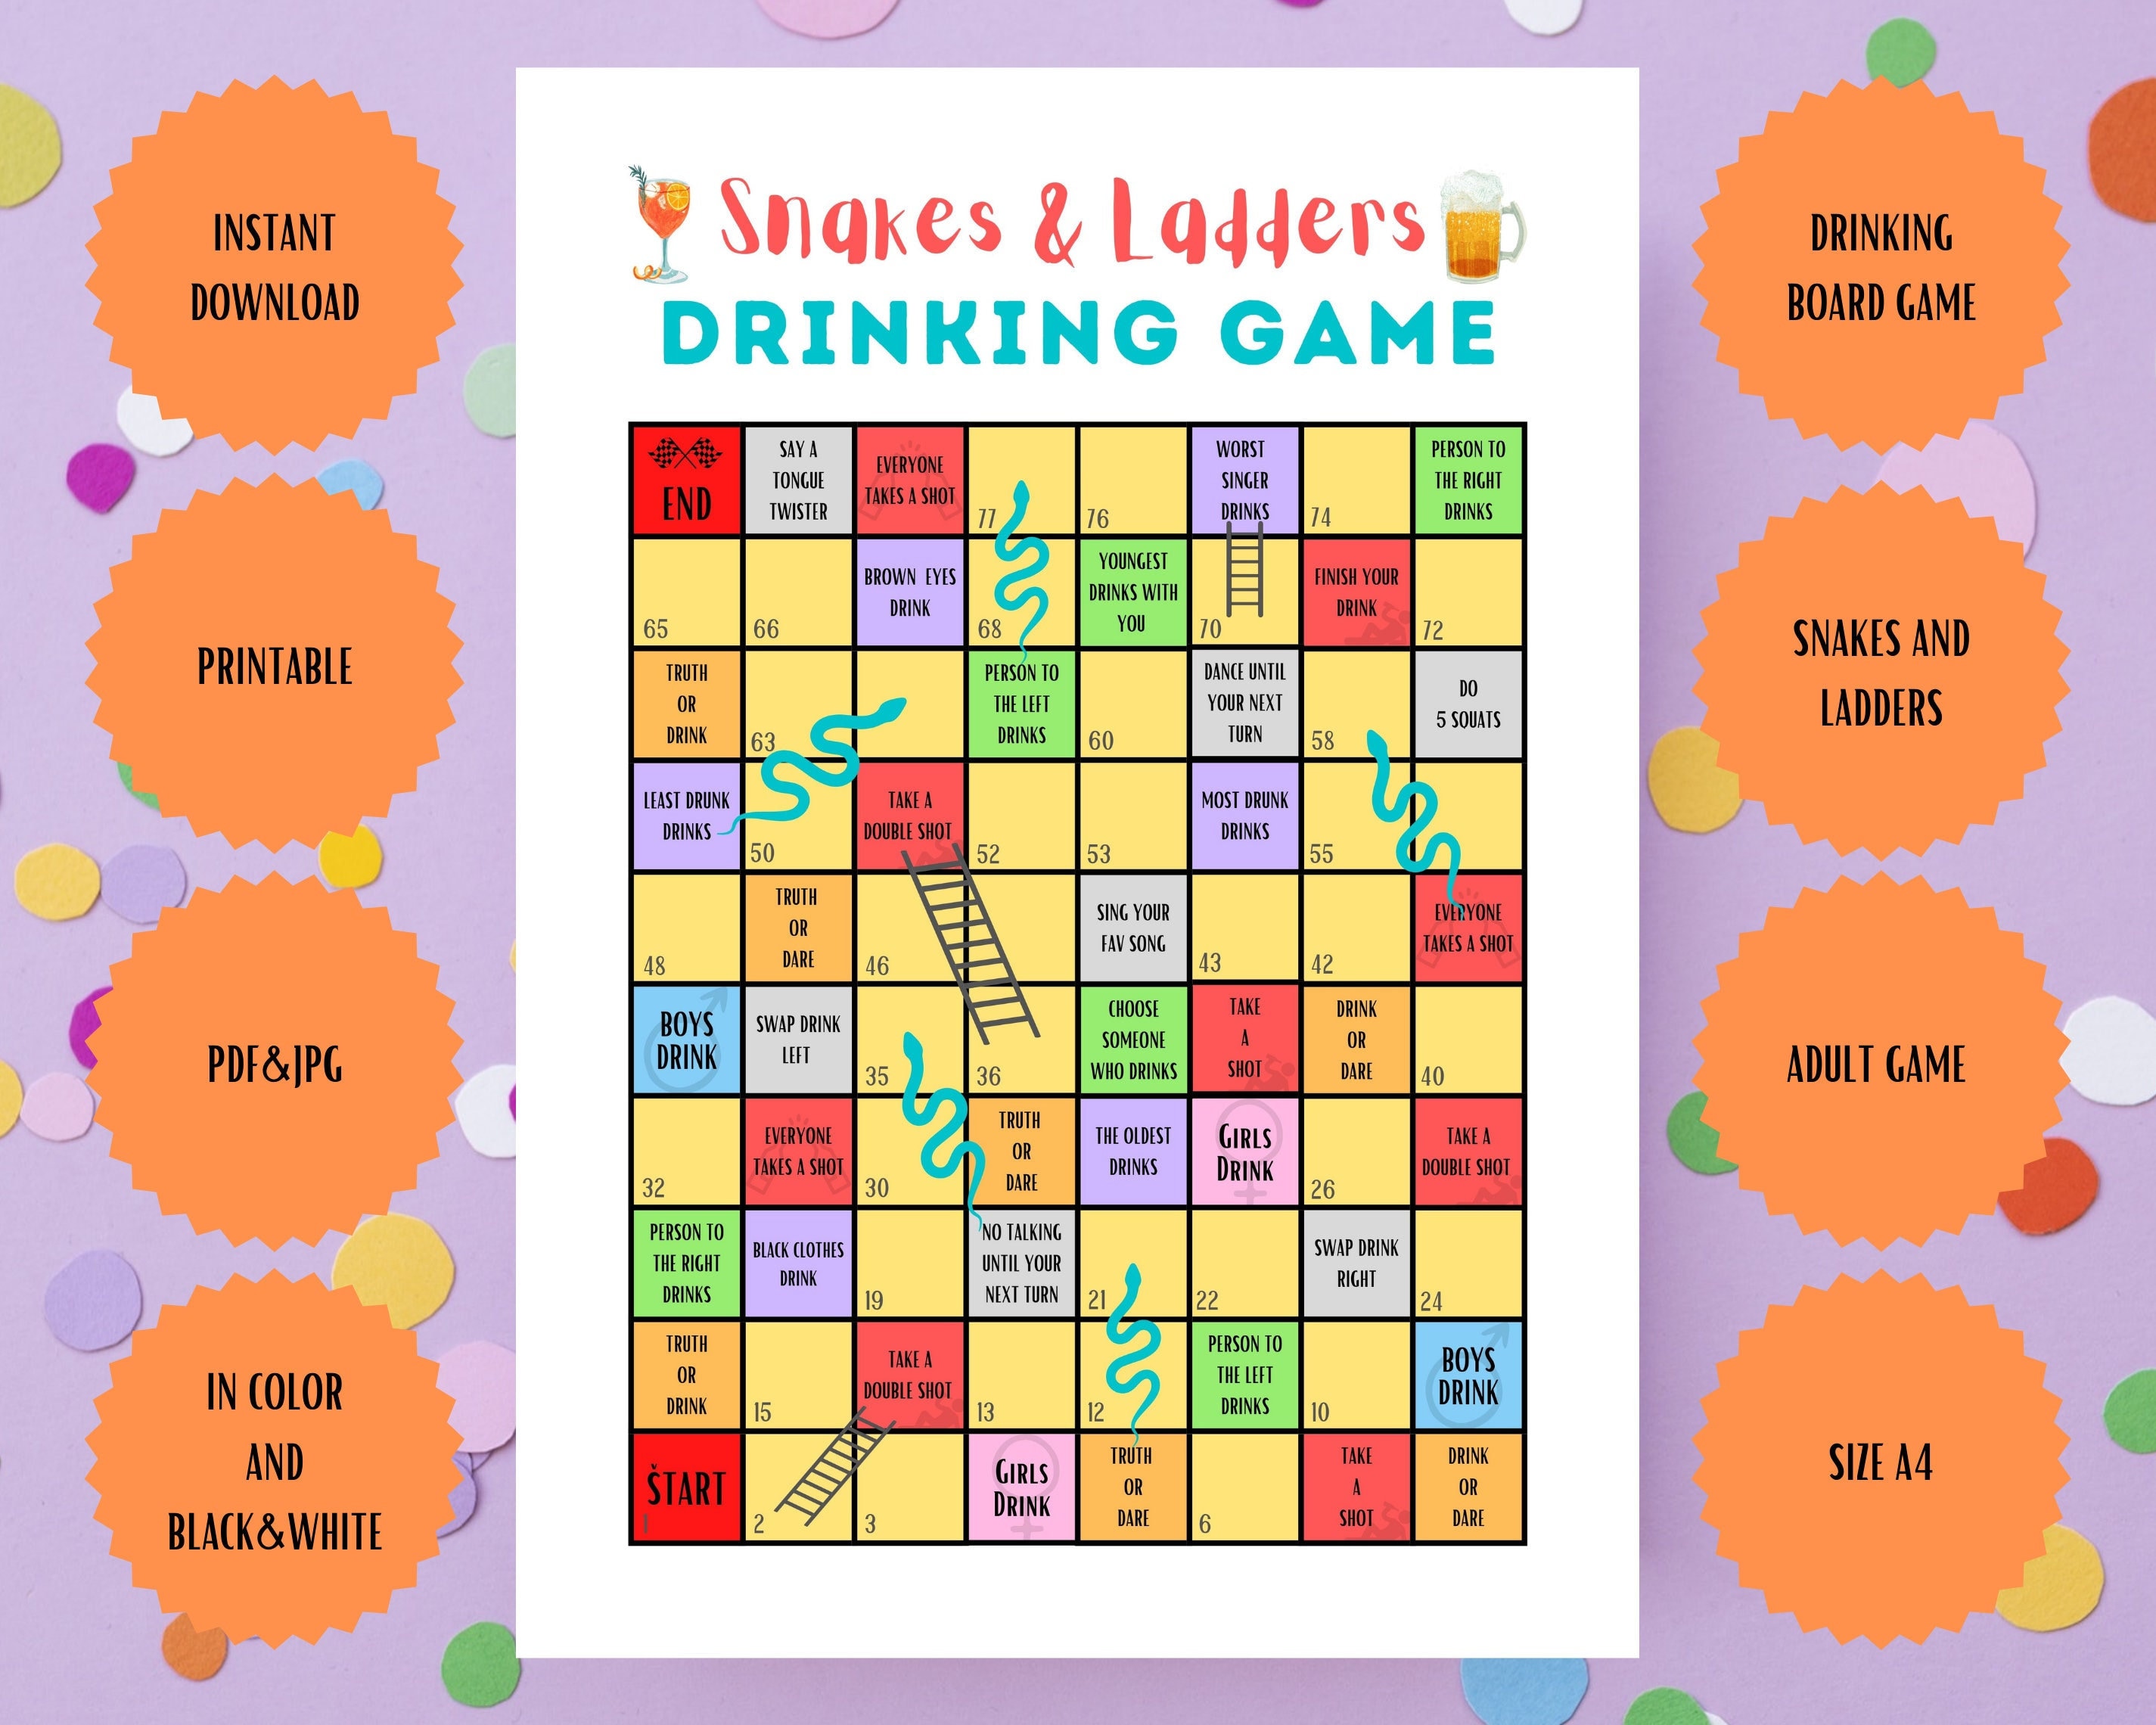 Board drinking game snakes and ladders chutes and ladders adult game printable instant download pdf jpg a party game download now